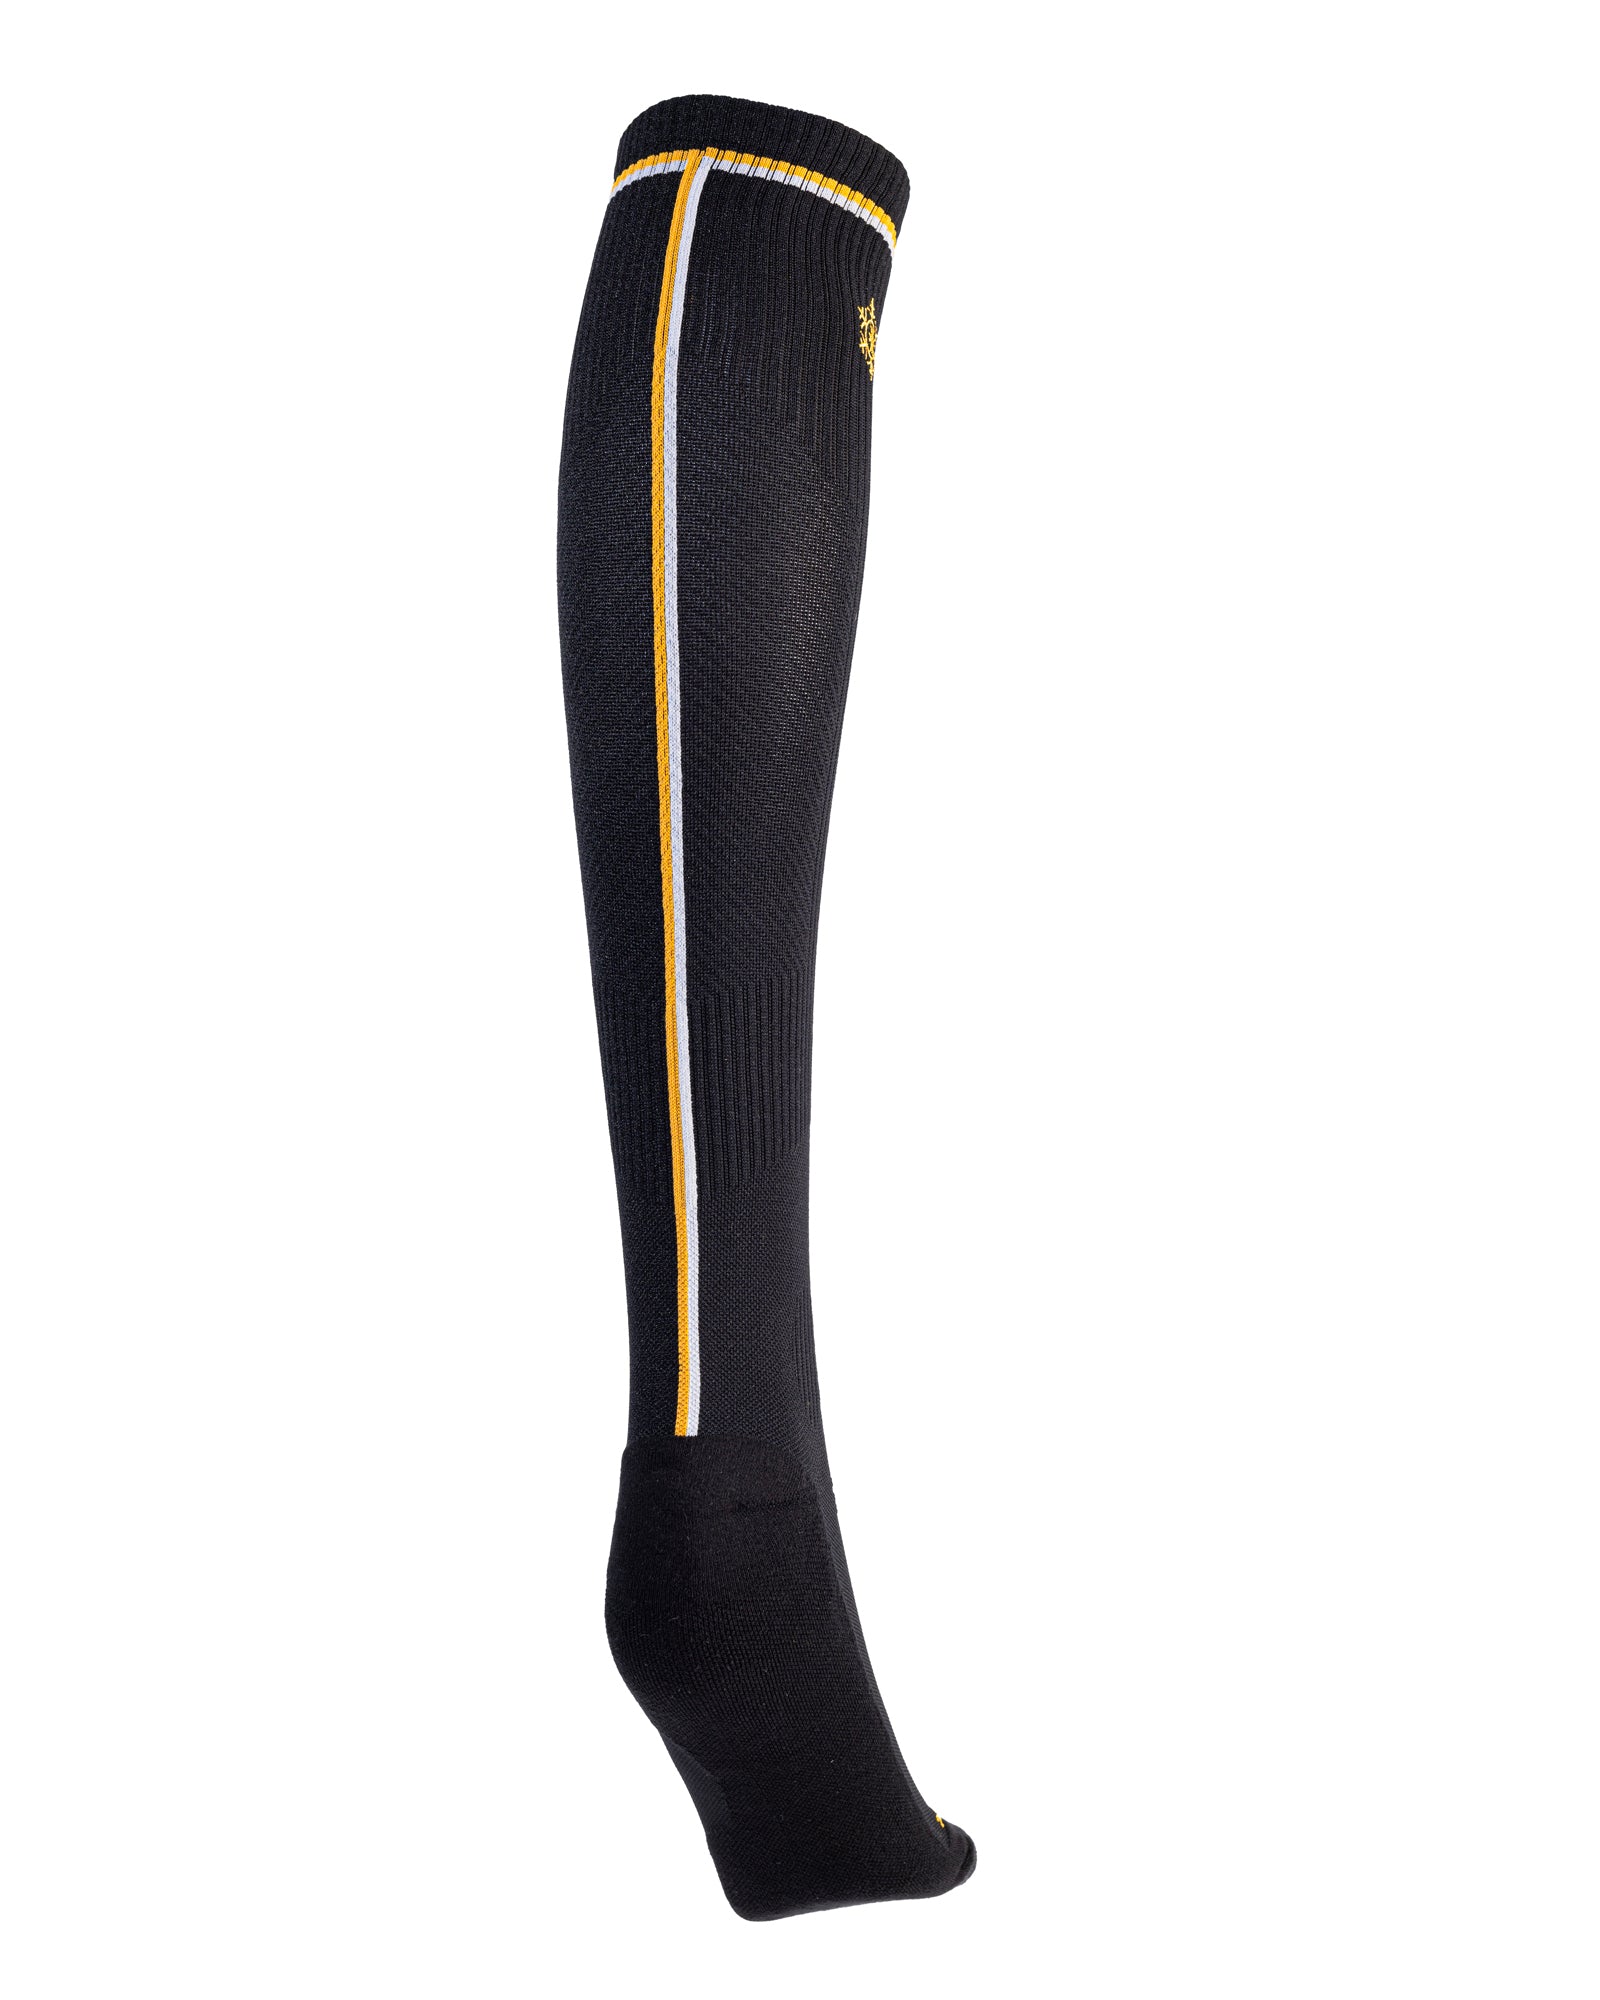 Extreme Fit Reflective Knee High Compression Socks Pair, Back Stripes -  9940150